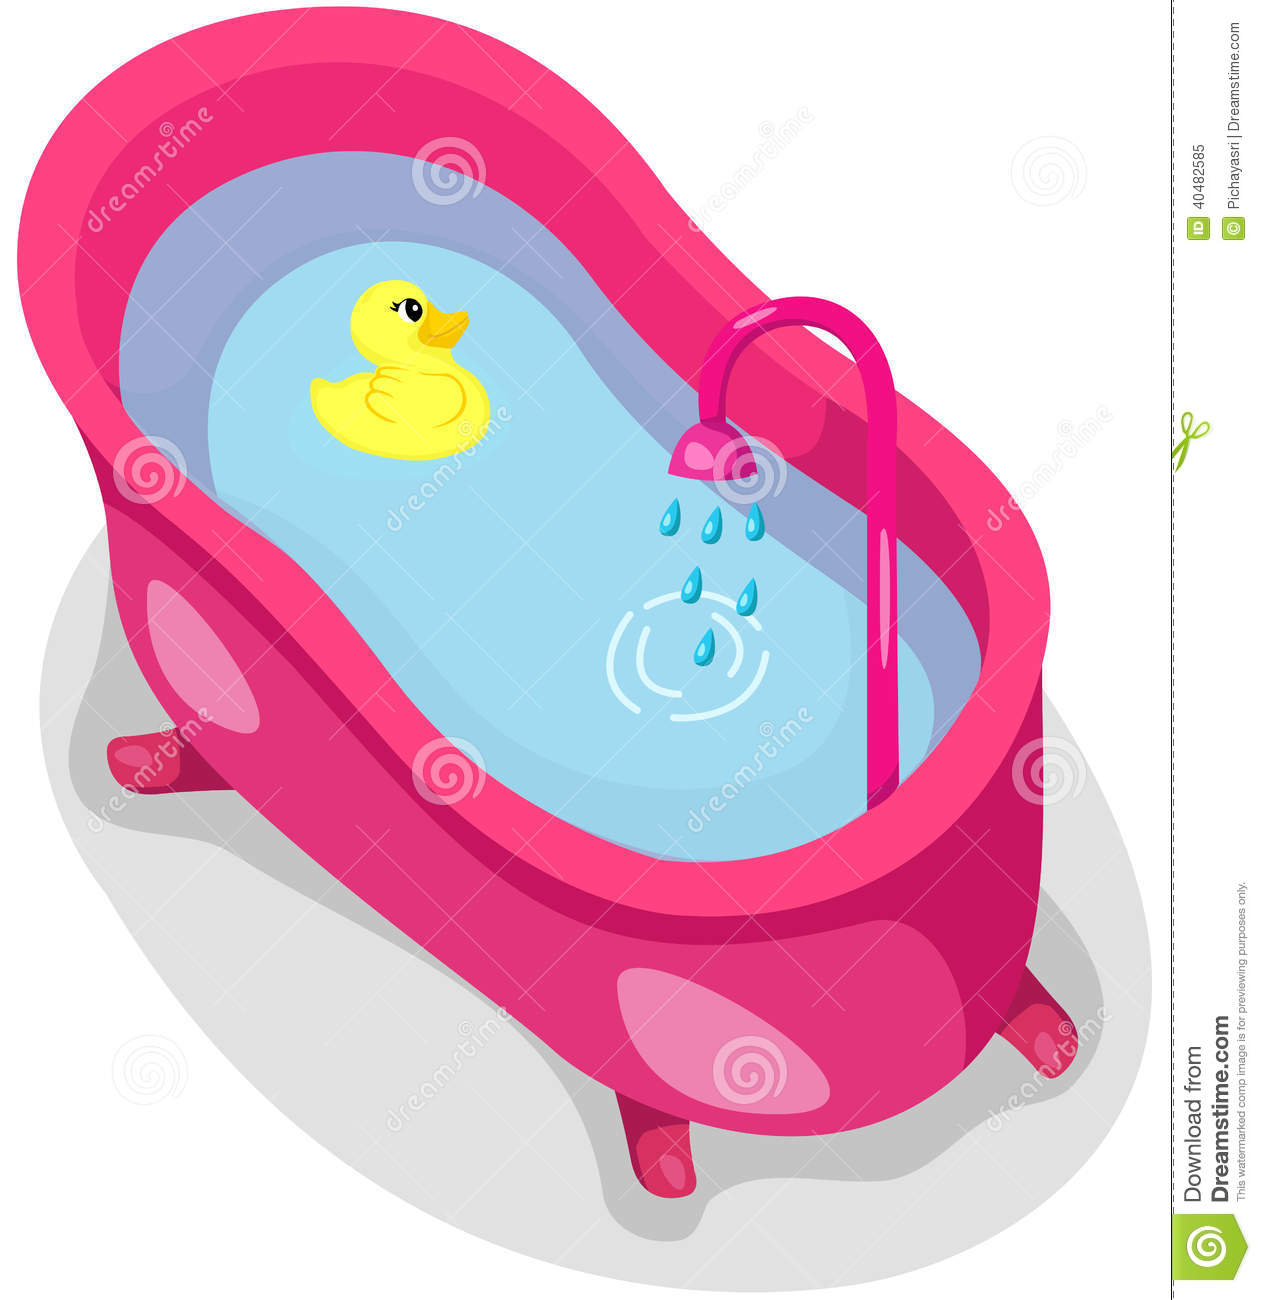 Illustration Of Isolated A Bathtub With Rubber Duck